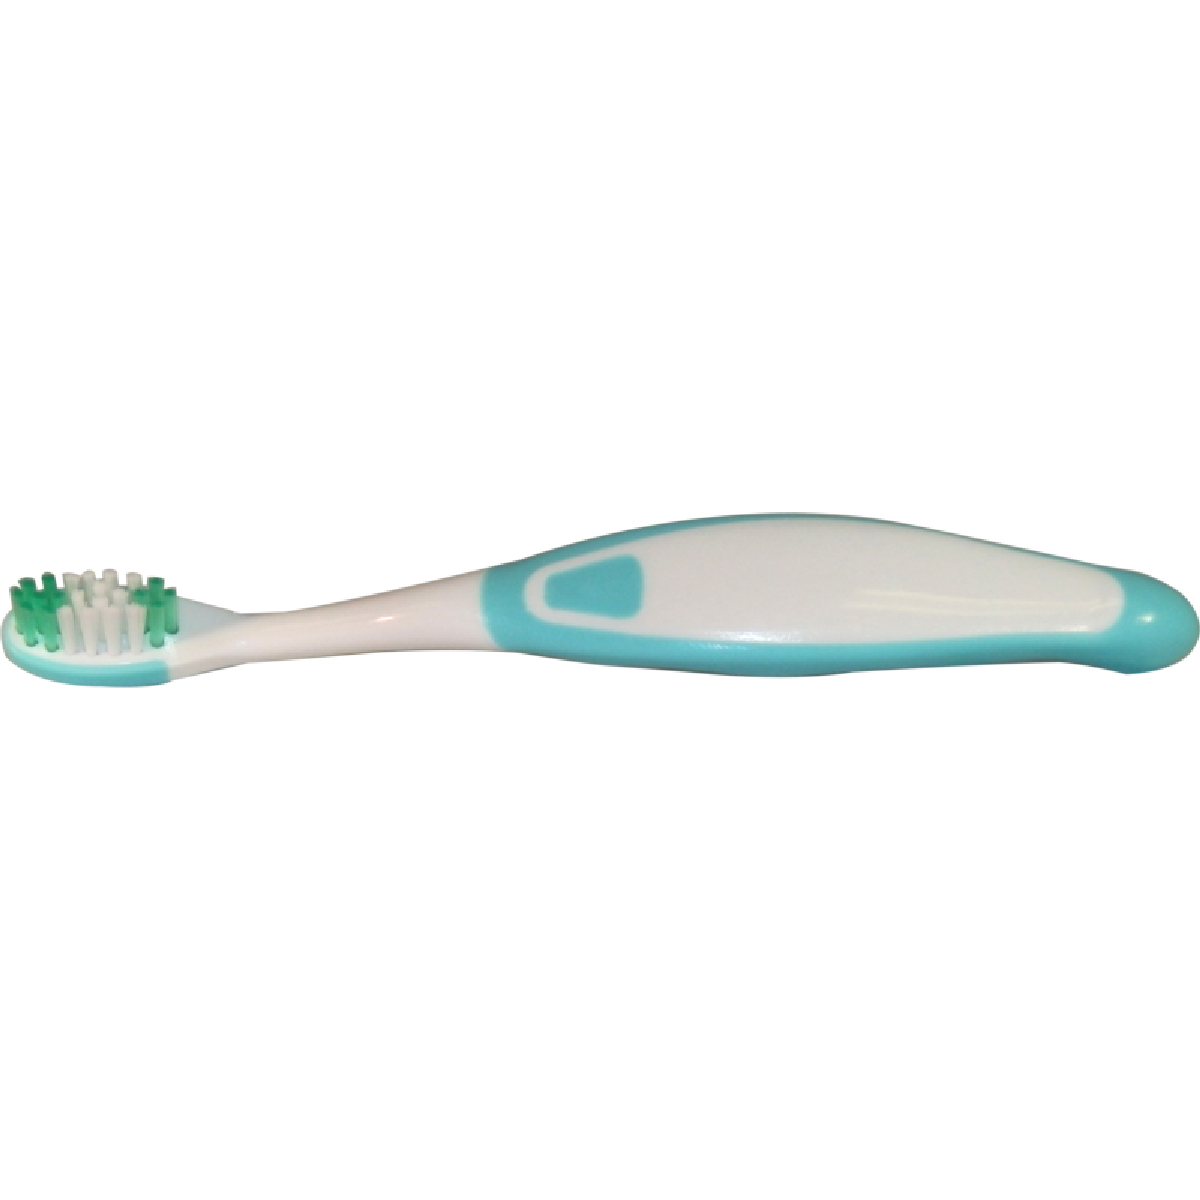 Assorted Child Age 2 to 4 Yrs Toothbrush - Stage 1